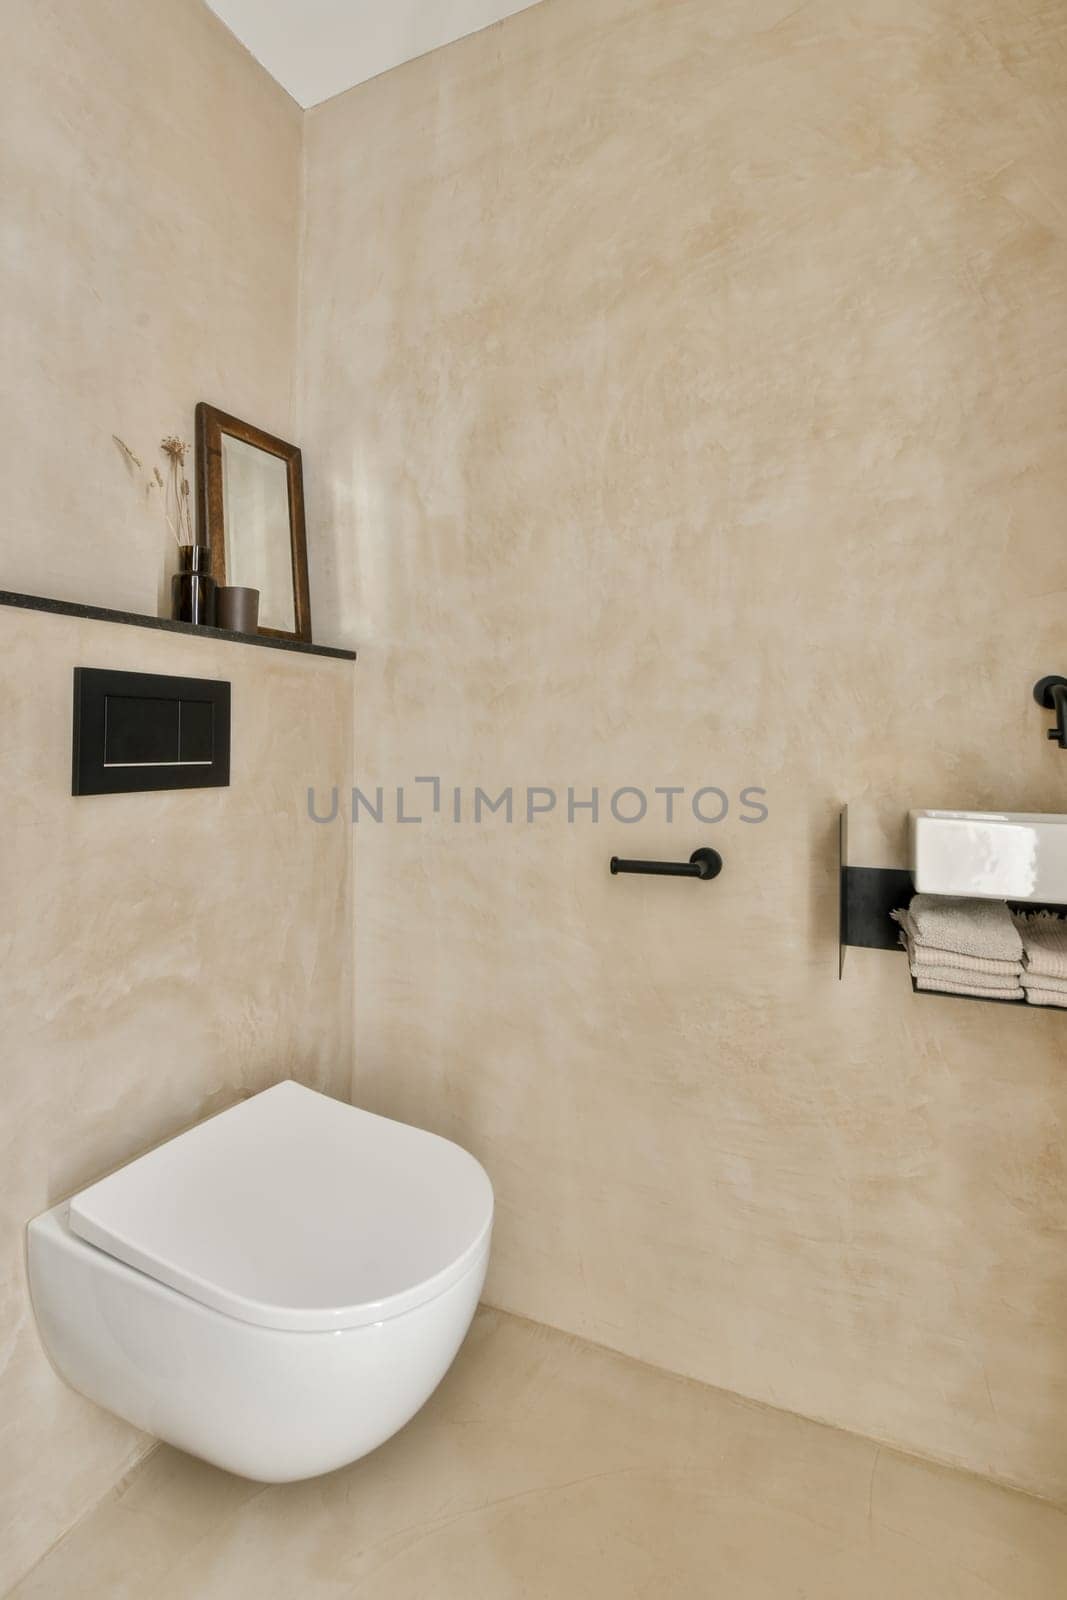 a bathroom with a toilet and a wall mounted mirror by casamedia